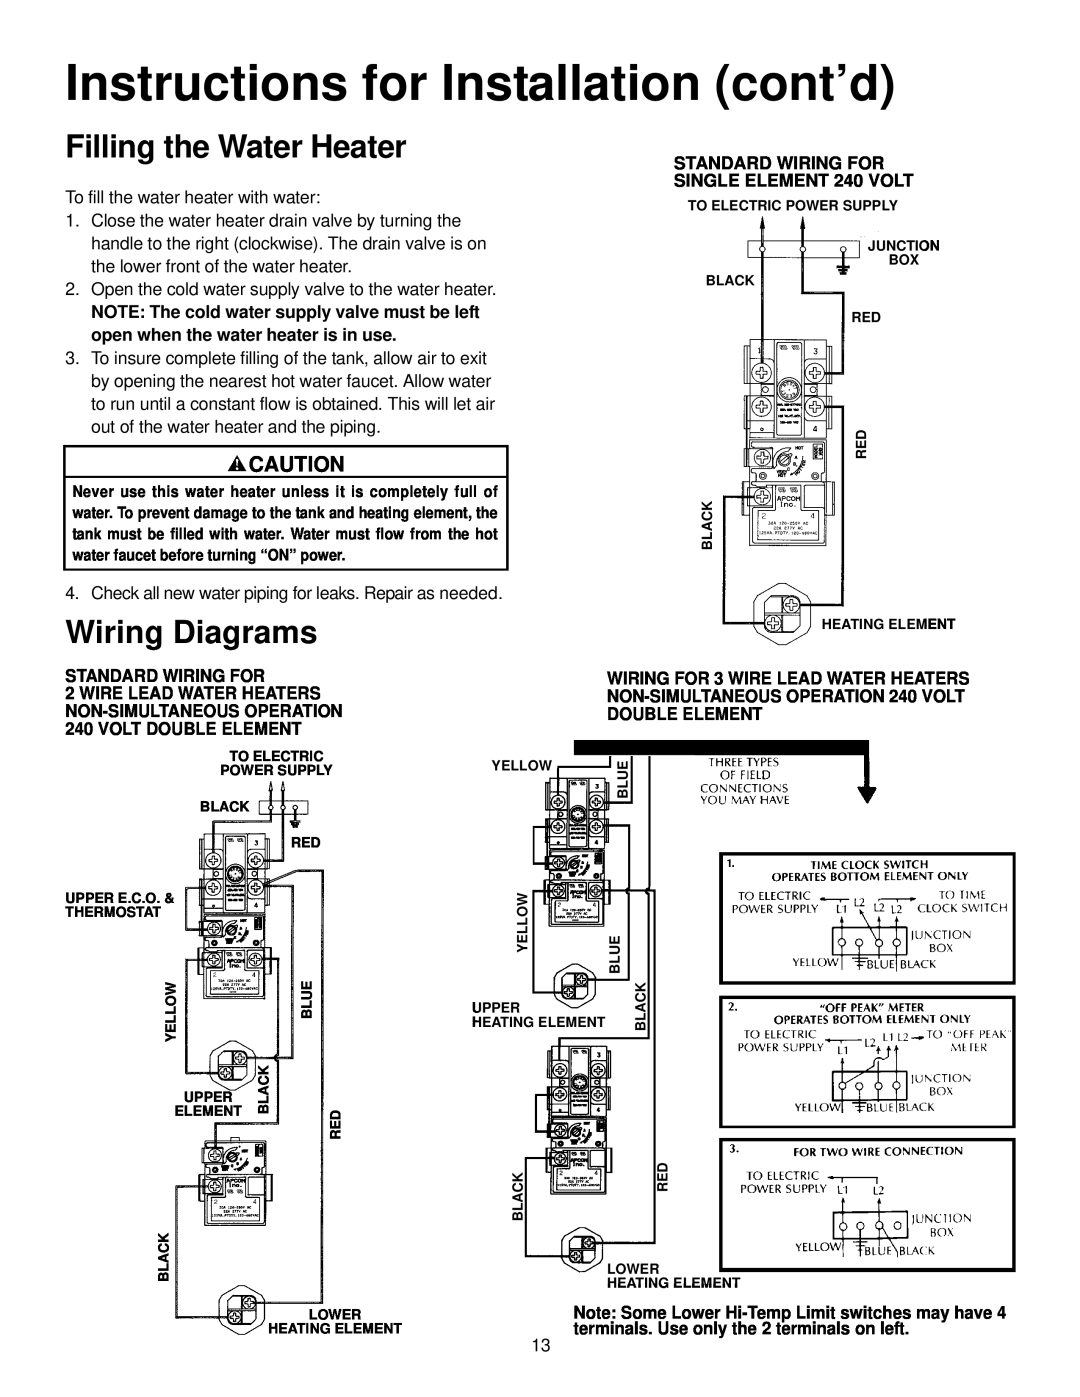 Maytag HR650SJRS Filling the Water Heater, Wiring Diagrams, Instructions for Installation cont’d, Standard Wiring For 